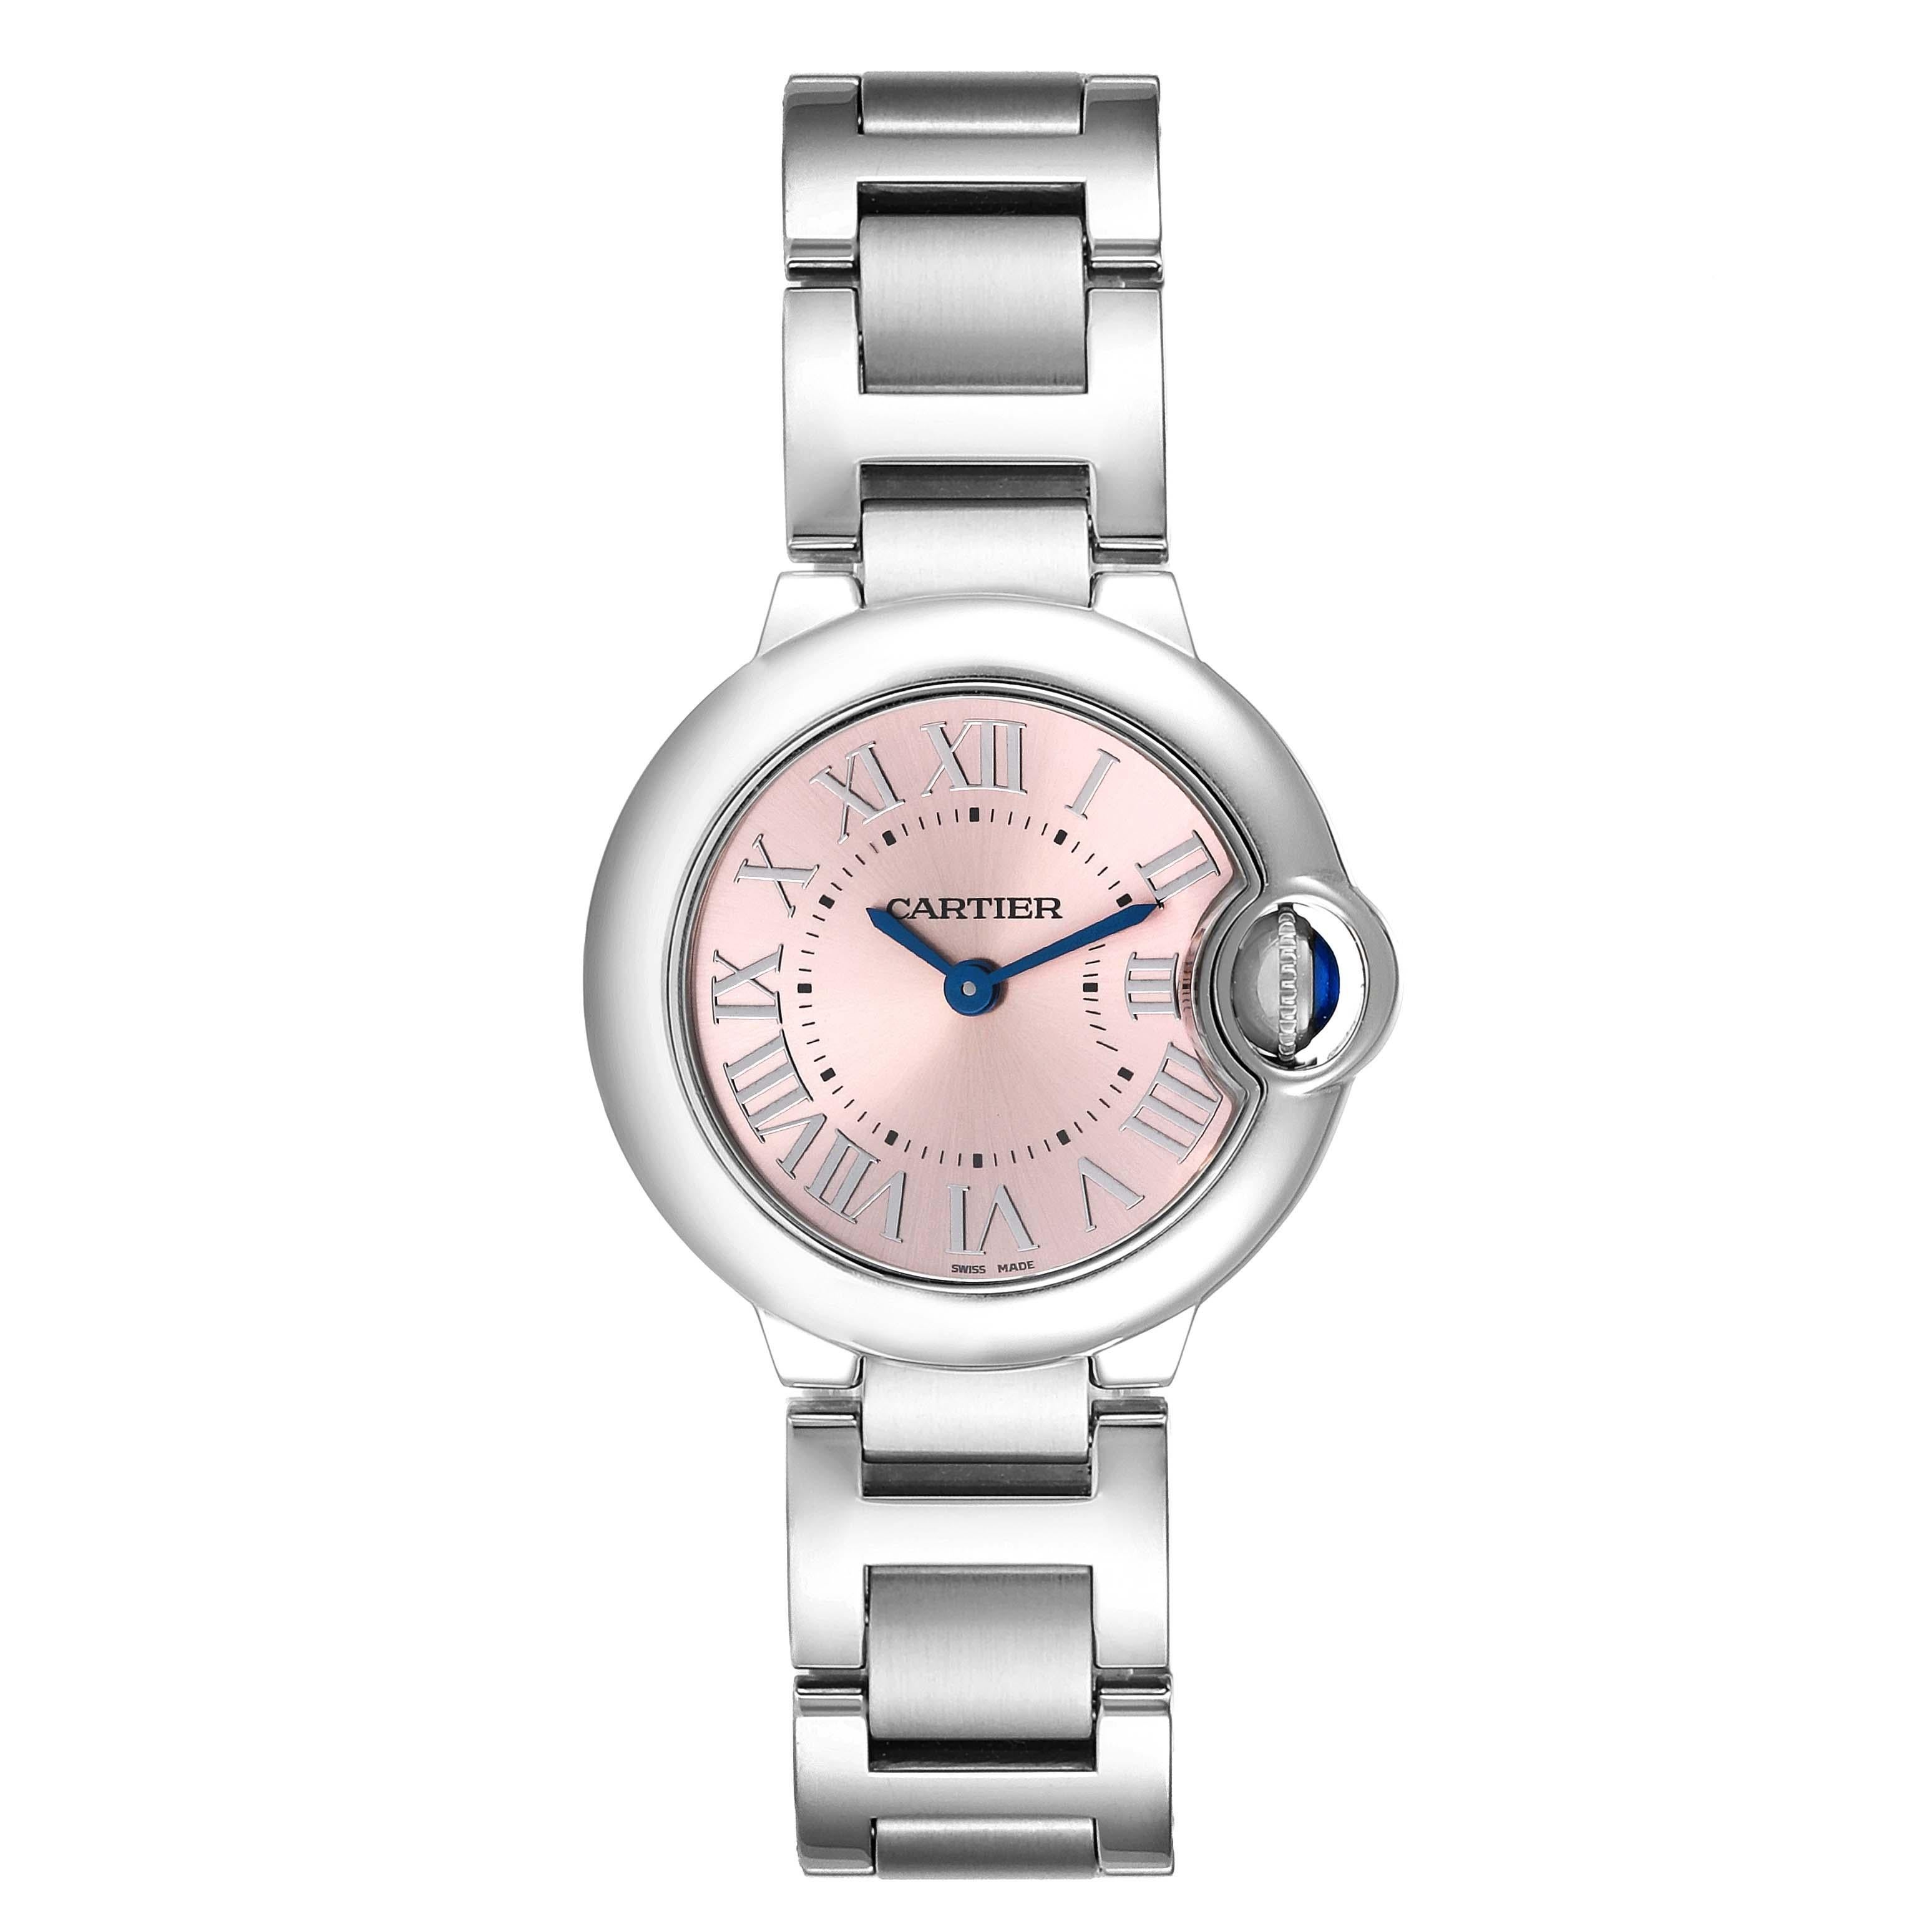 Cartier Ballon Bleu Pink Dial 28mm Steel Ladies Watch W6920038 Box Papers. Quartz movement. Round stainless steel case 28 mm in diameter. Fluted crown set with the blue spinel cabochon. Stainless steel smooth bezel. Scratch resistant sapphire